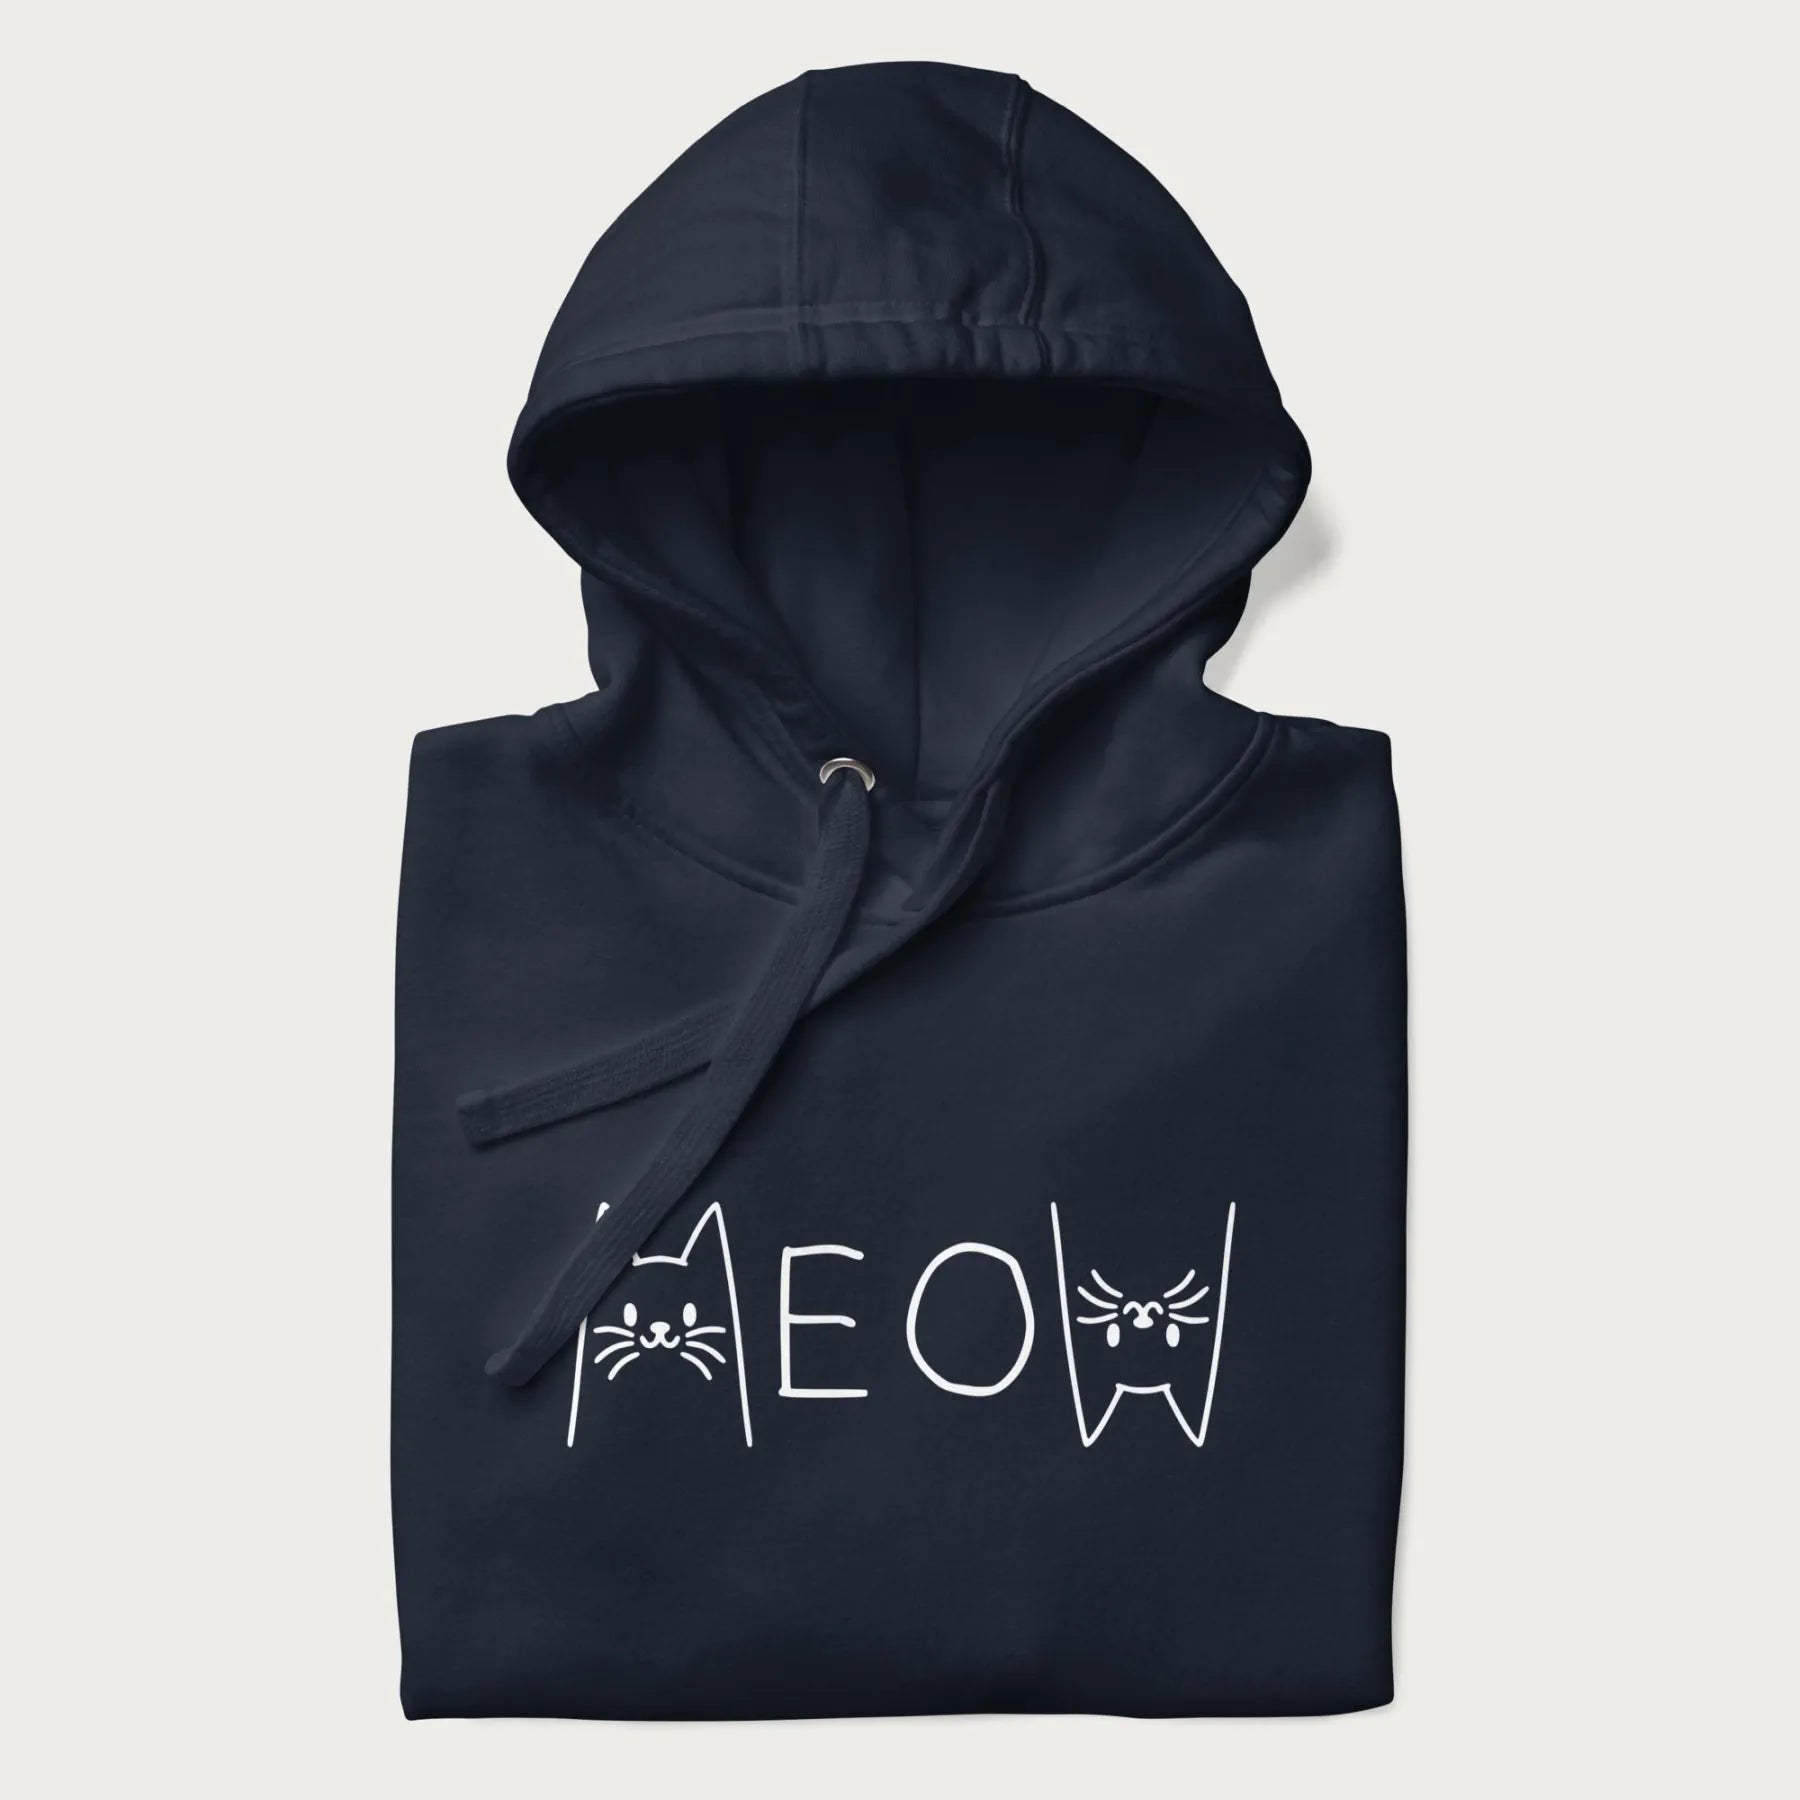 Folded navy meow hoodie with a simple 'MEOW' text and cute cat face graphics on the front.